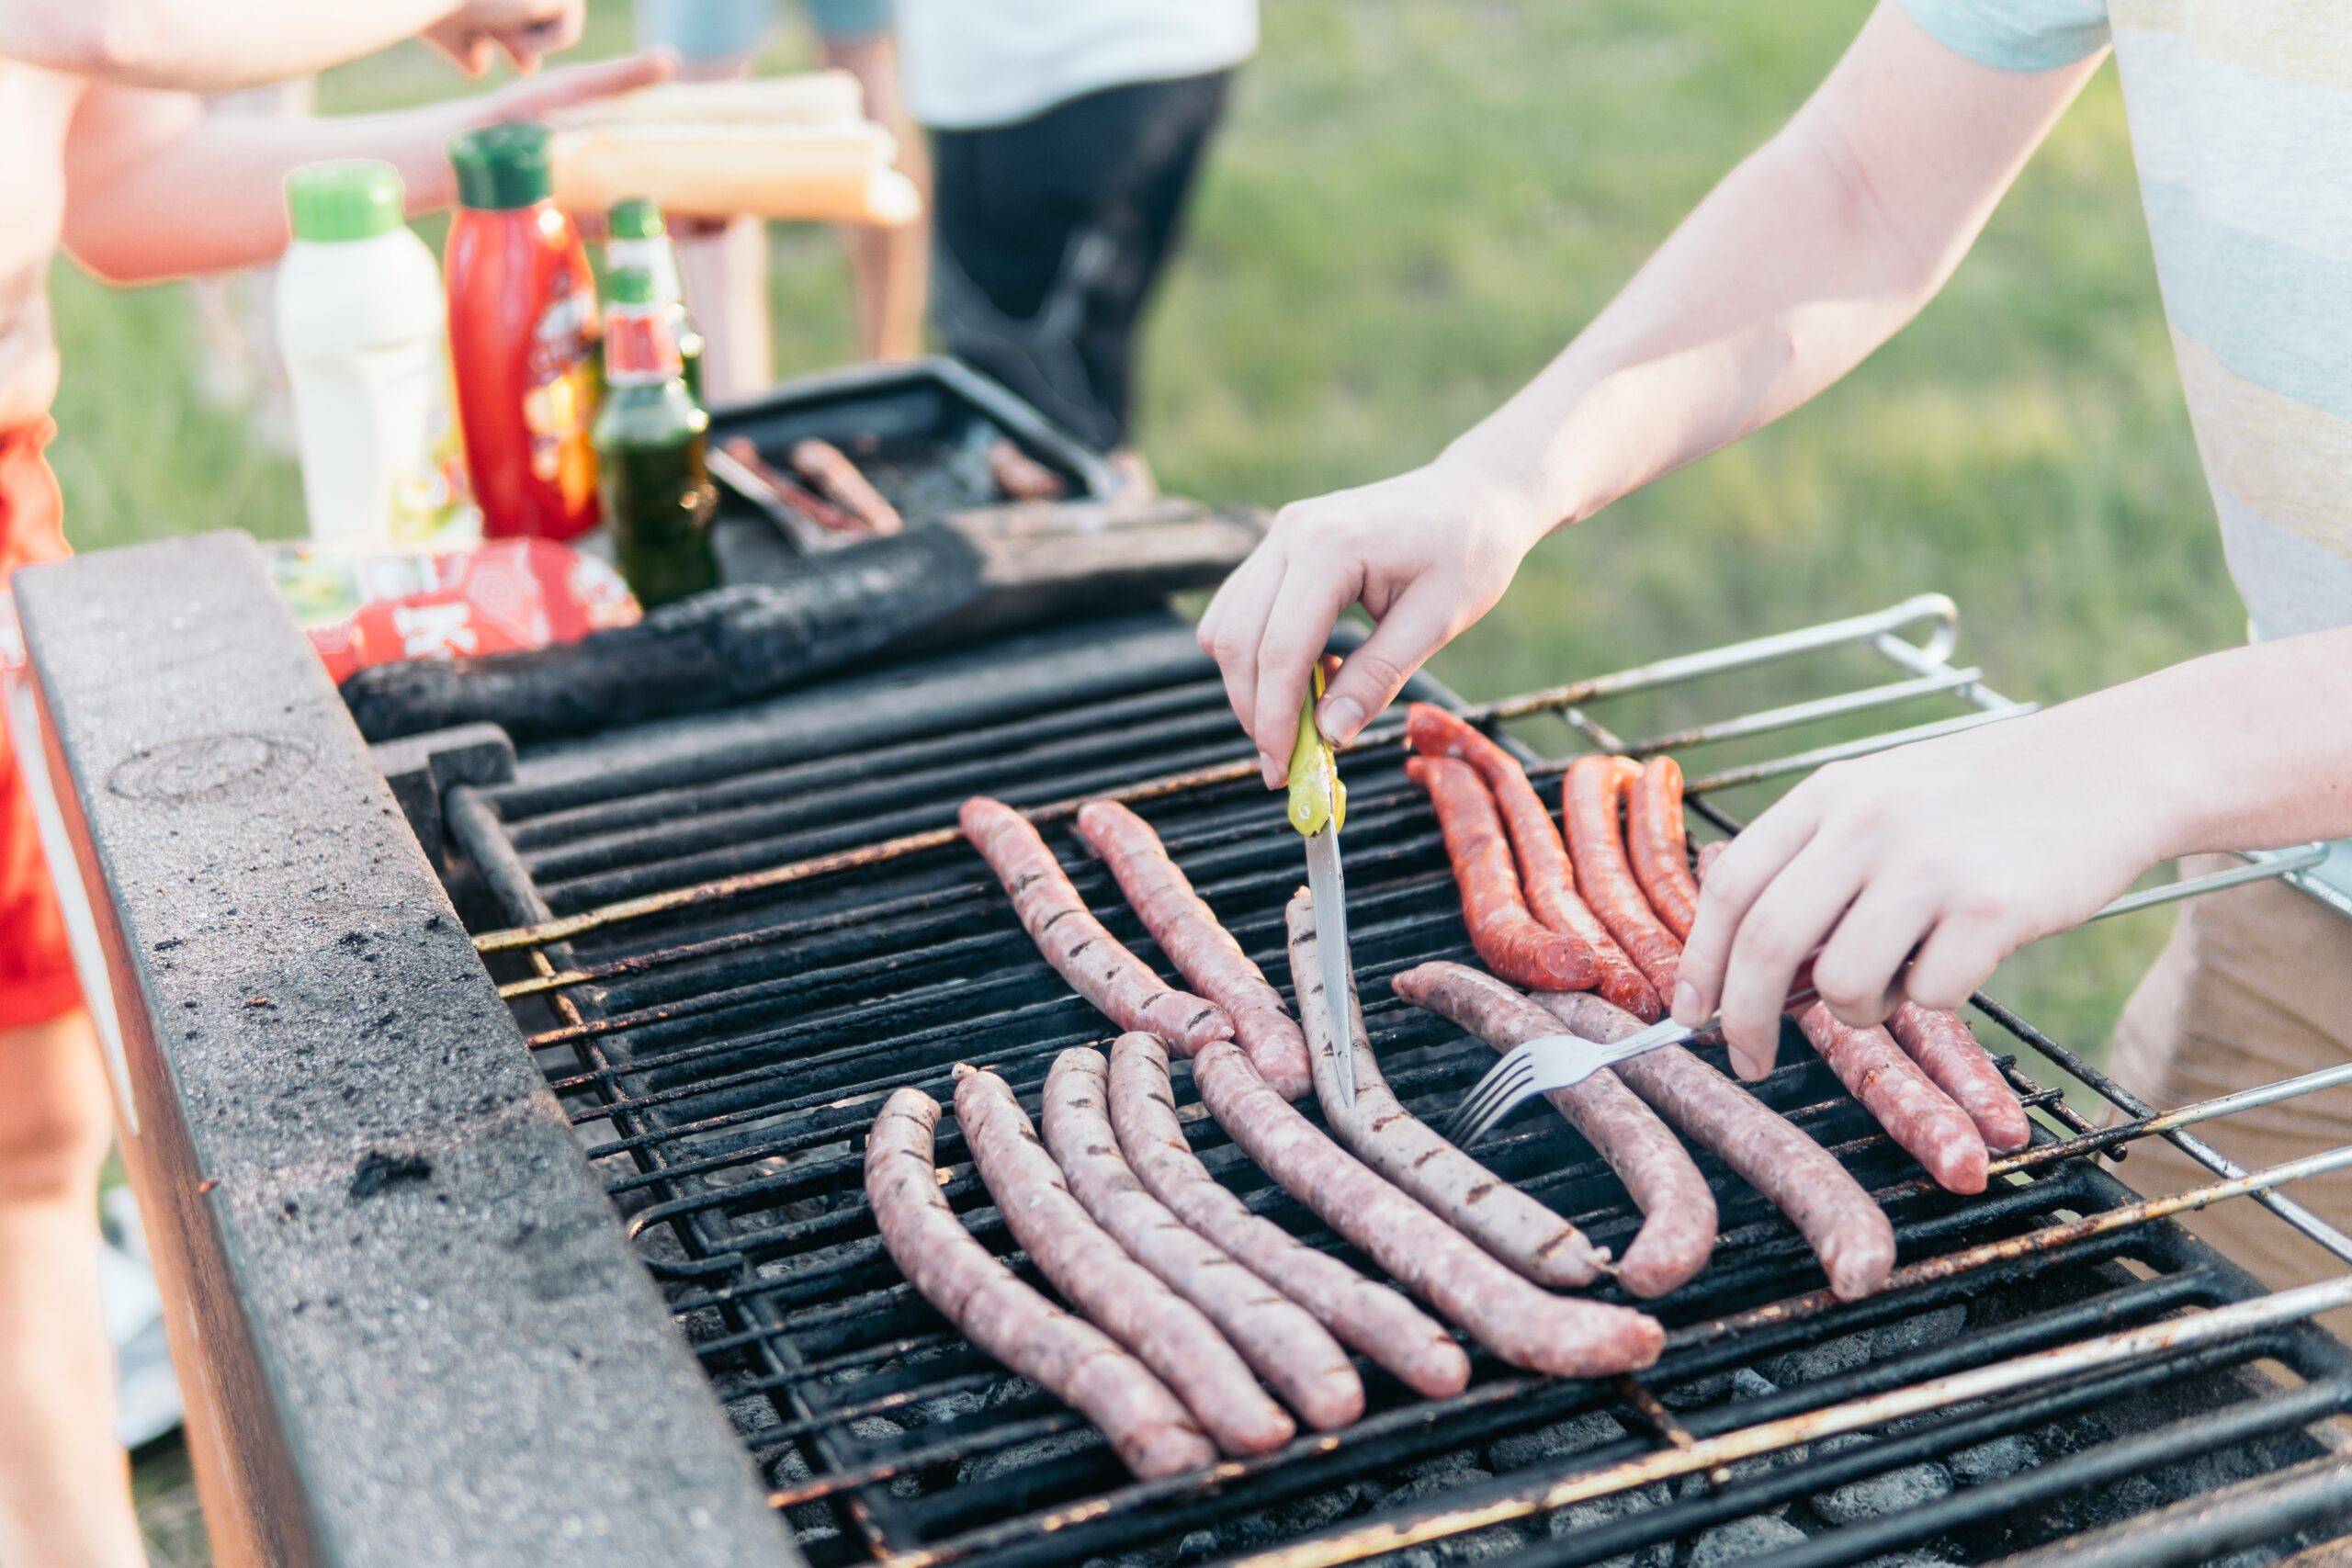 Perfecting Sausages: A How-To Grilling Guide 5 Easy Steps